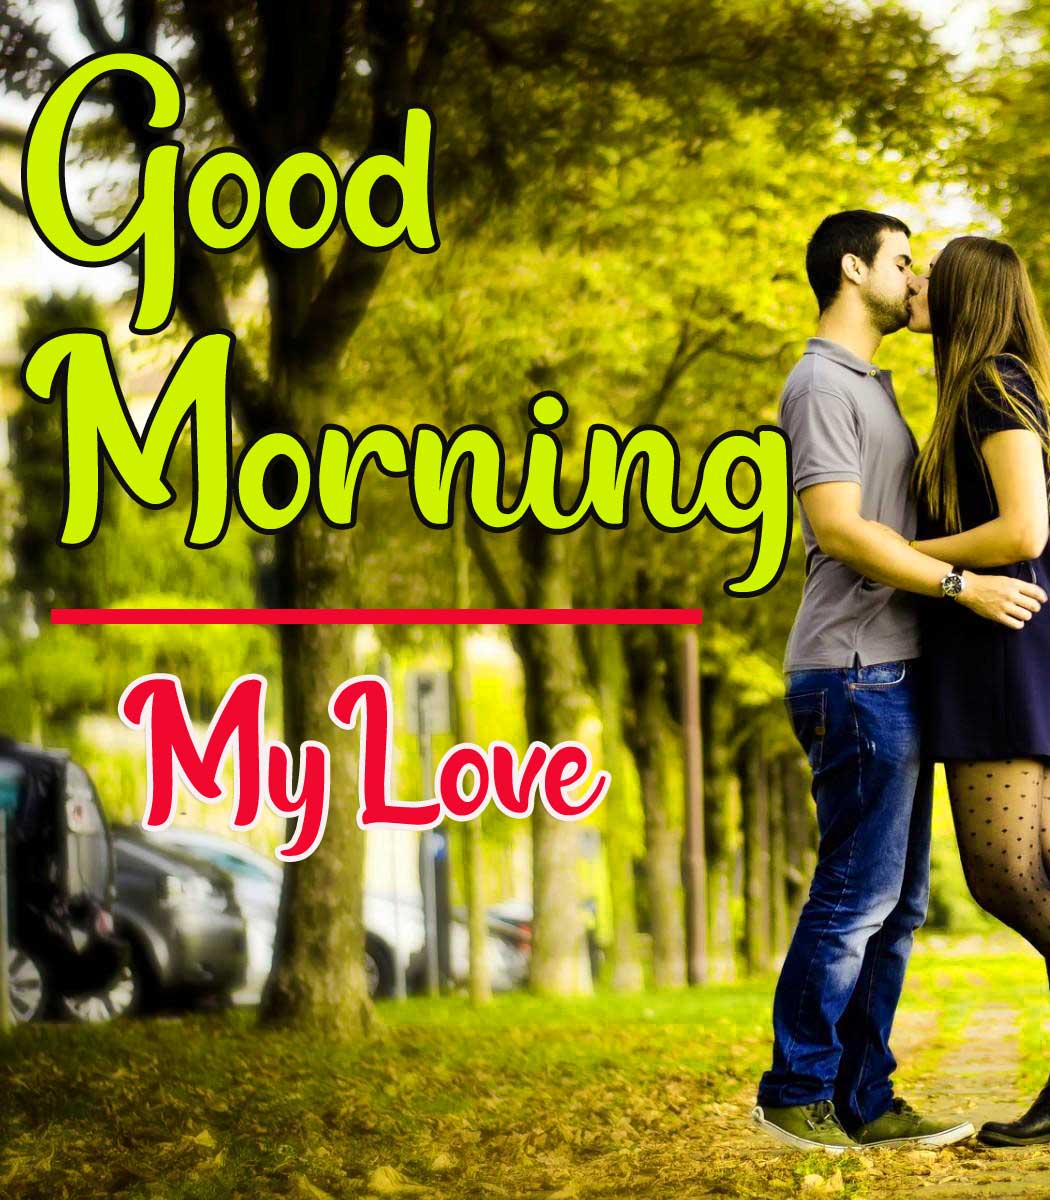 Good Morning Images for Love Couple (123) – Good Morning Images ...